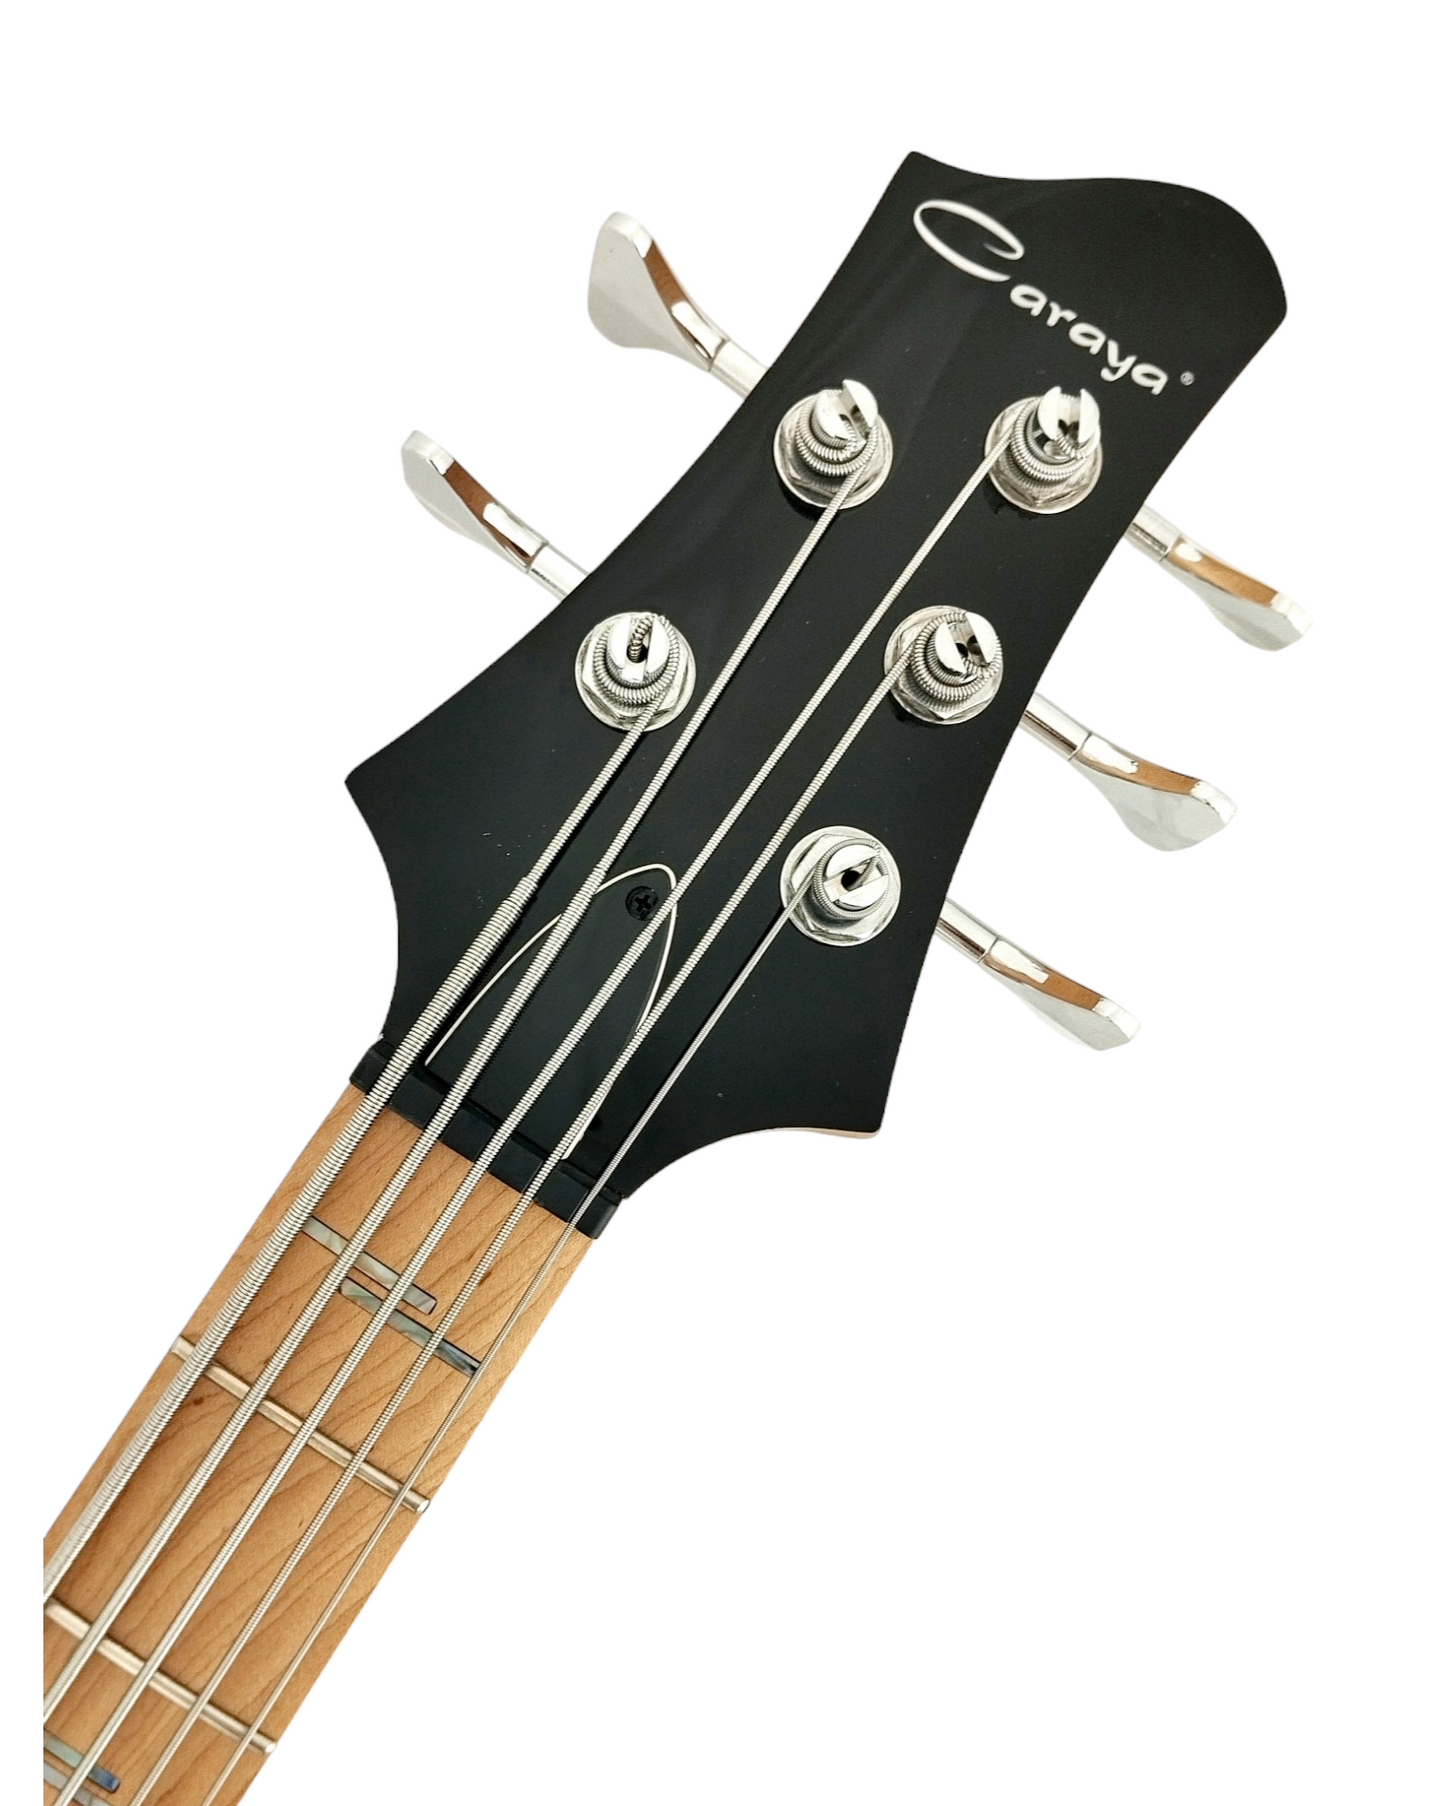 An Exquisite 5th String Bass Guitar with Superior Sound Quality BASS5